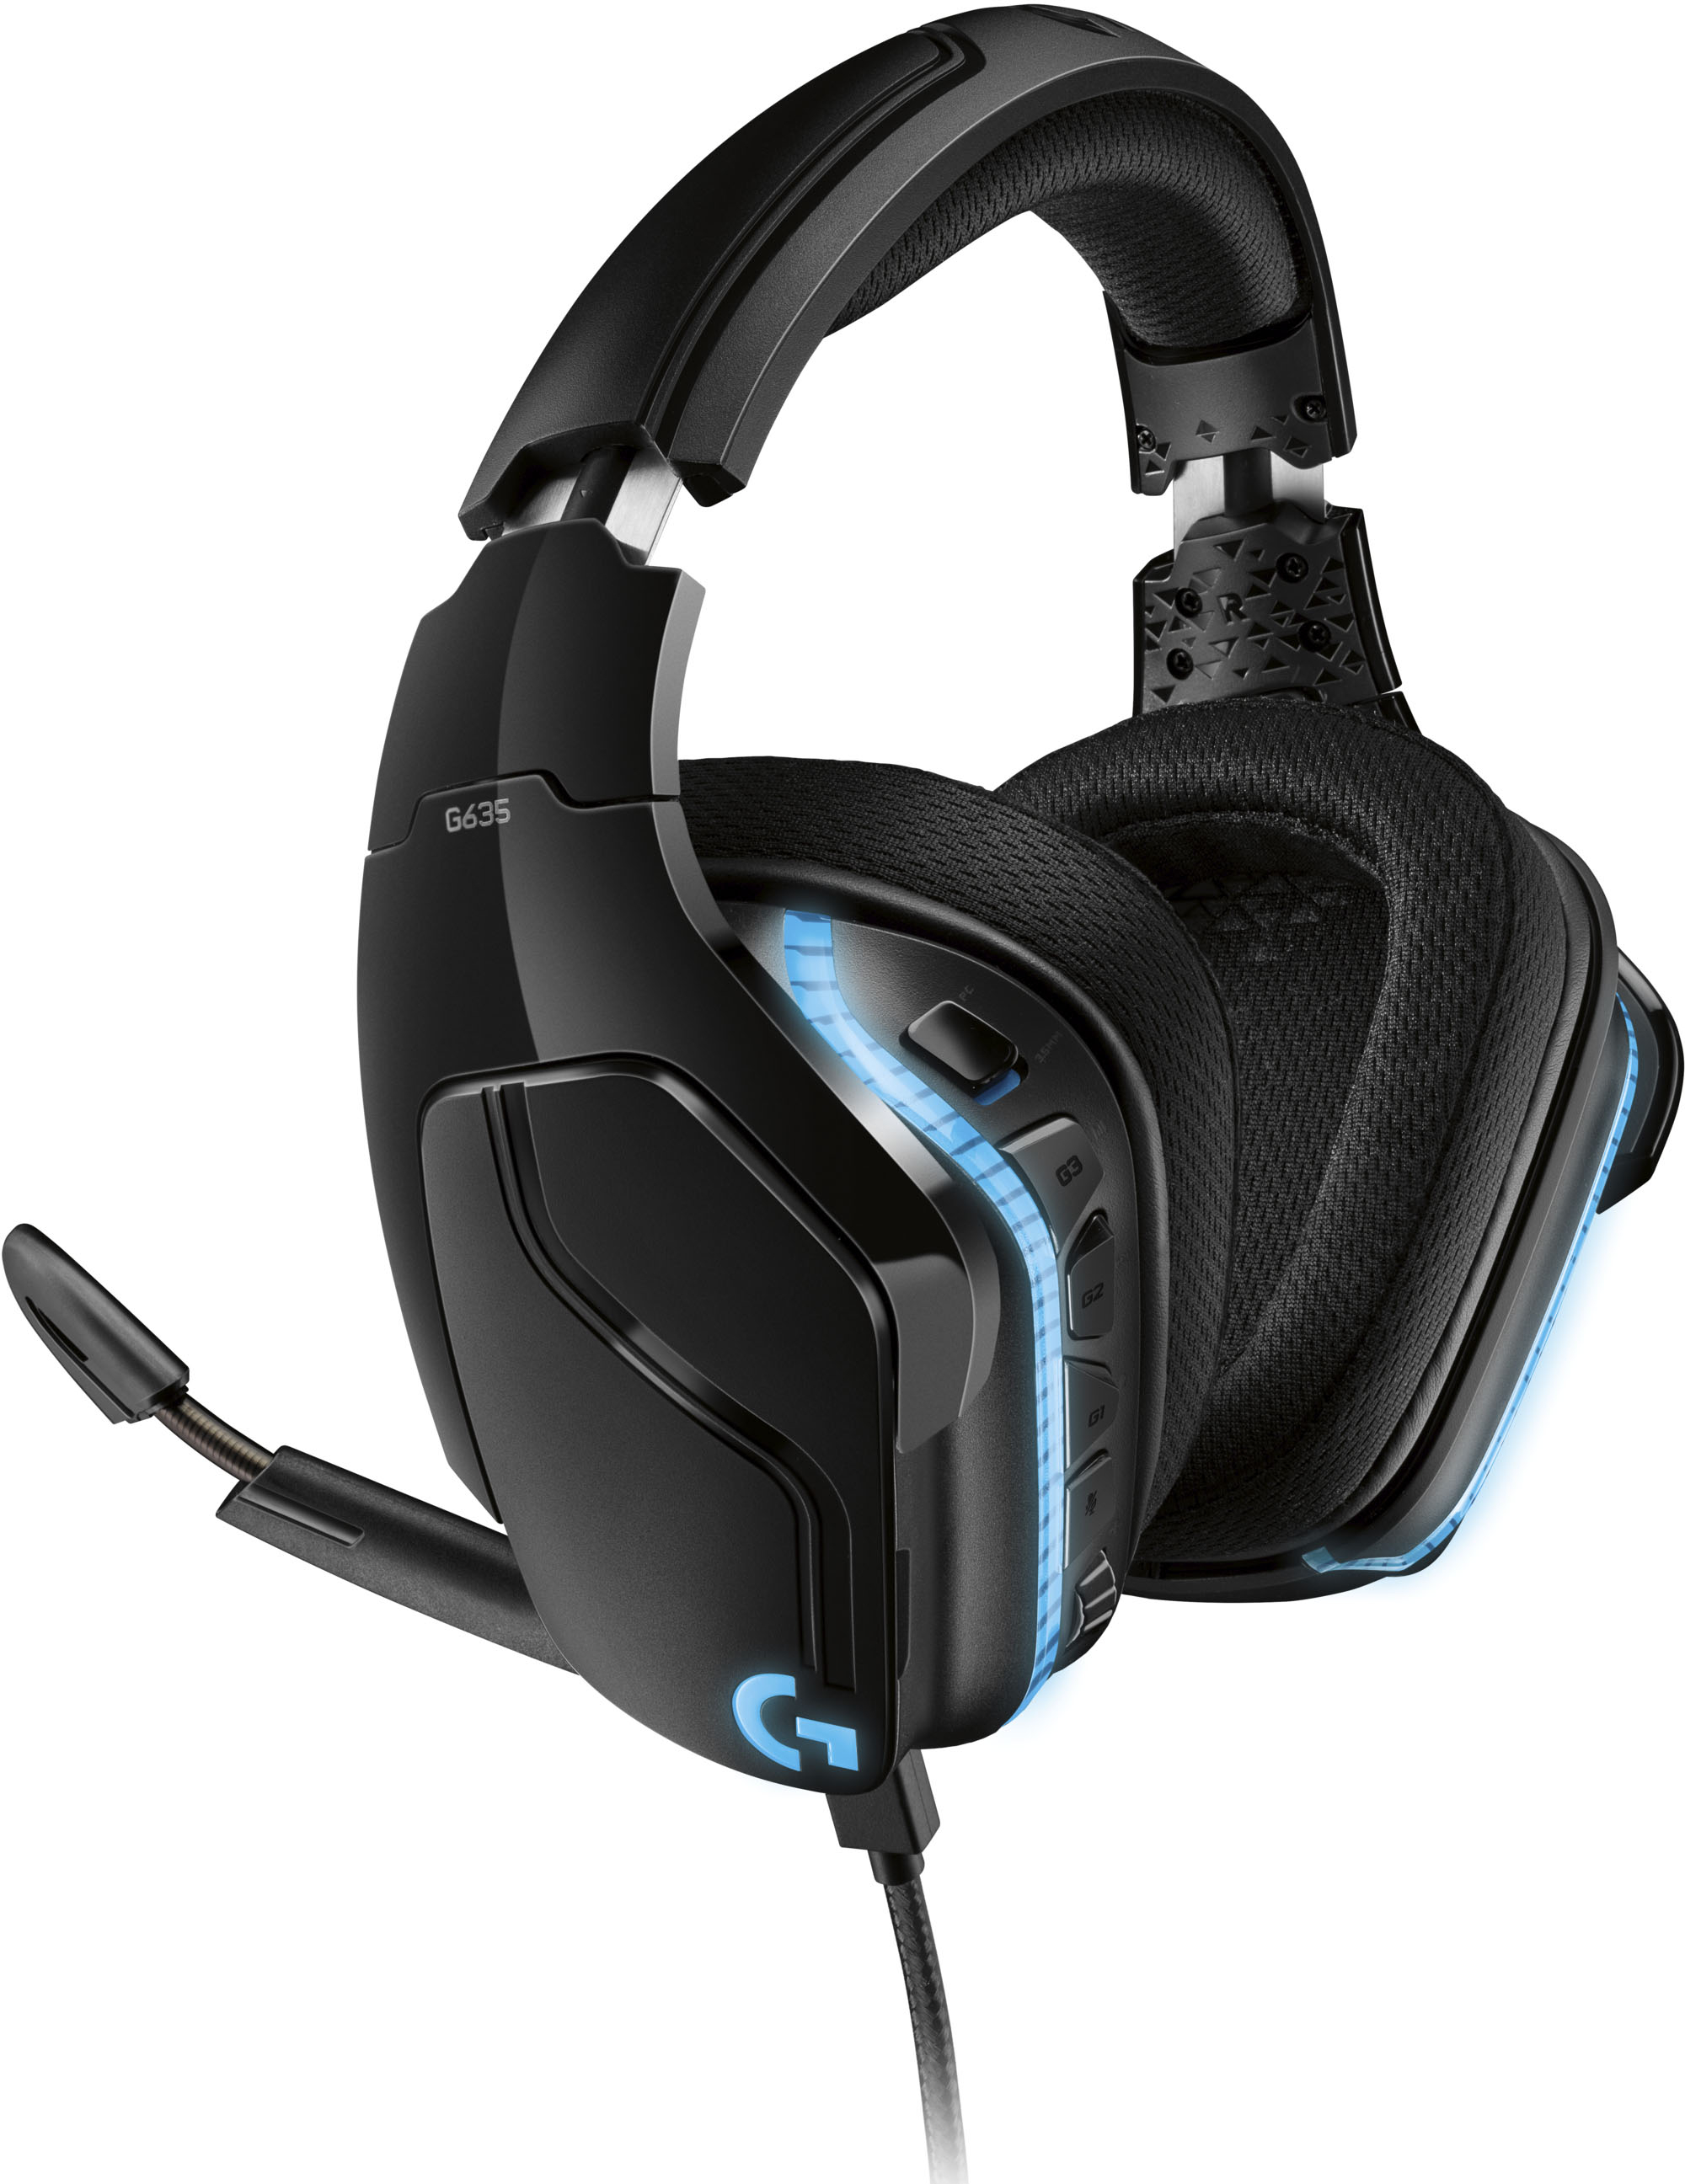 afspejle lindre At adskille Logitech G635 Wired 7.1 Surround Sound Over-the-Ear Gaming Headset for PC  with LIGHTSYNC RGB Lighting Black/Blue 981-000748 - Best Buy